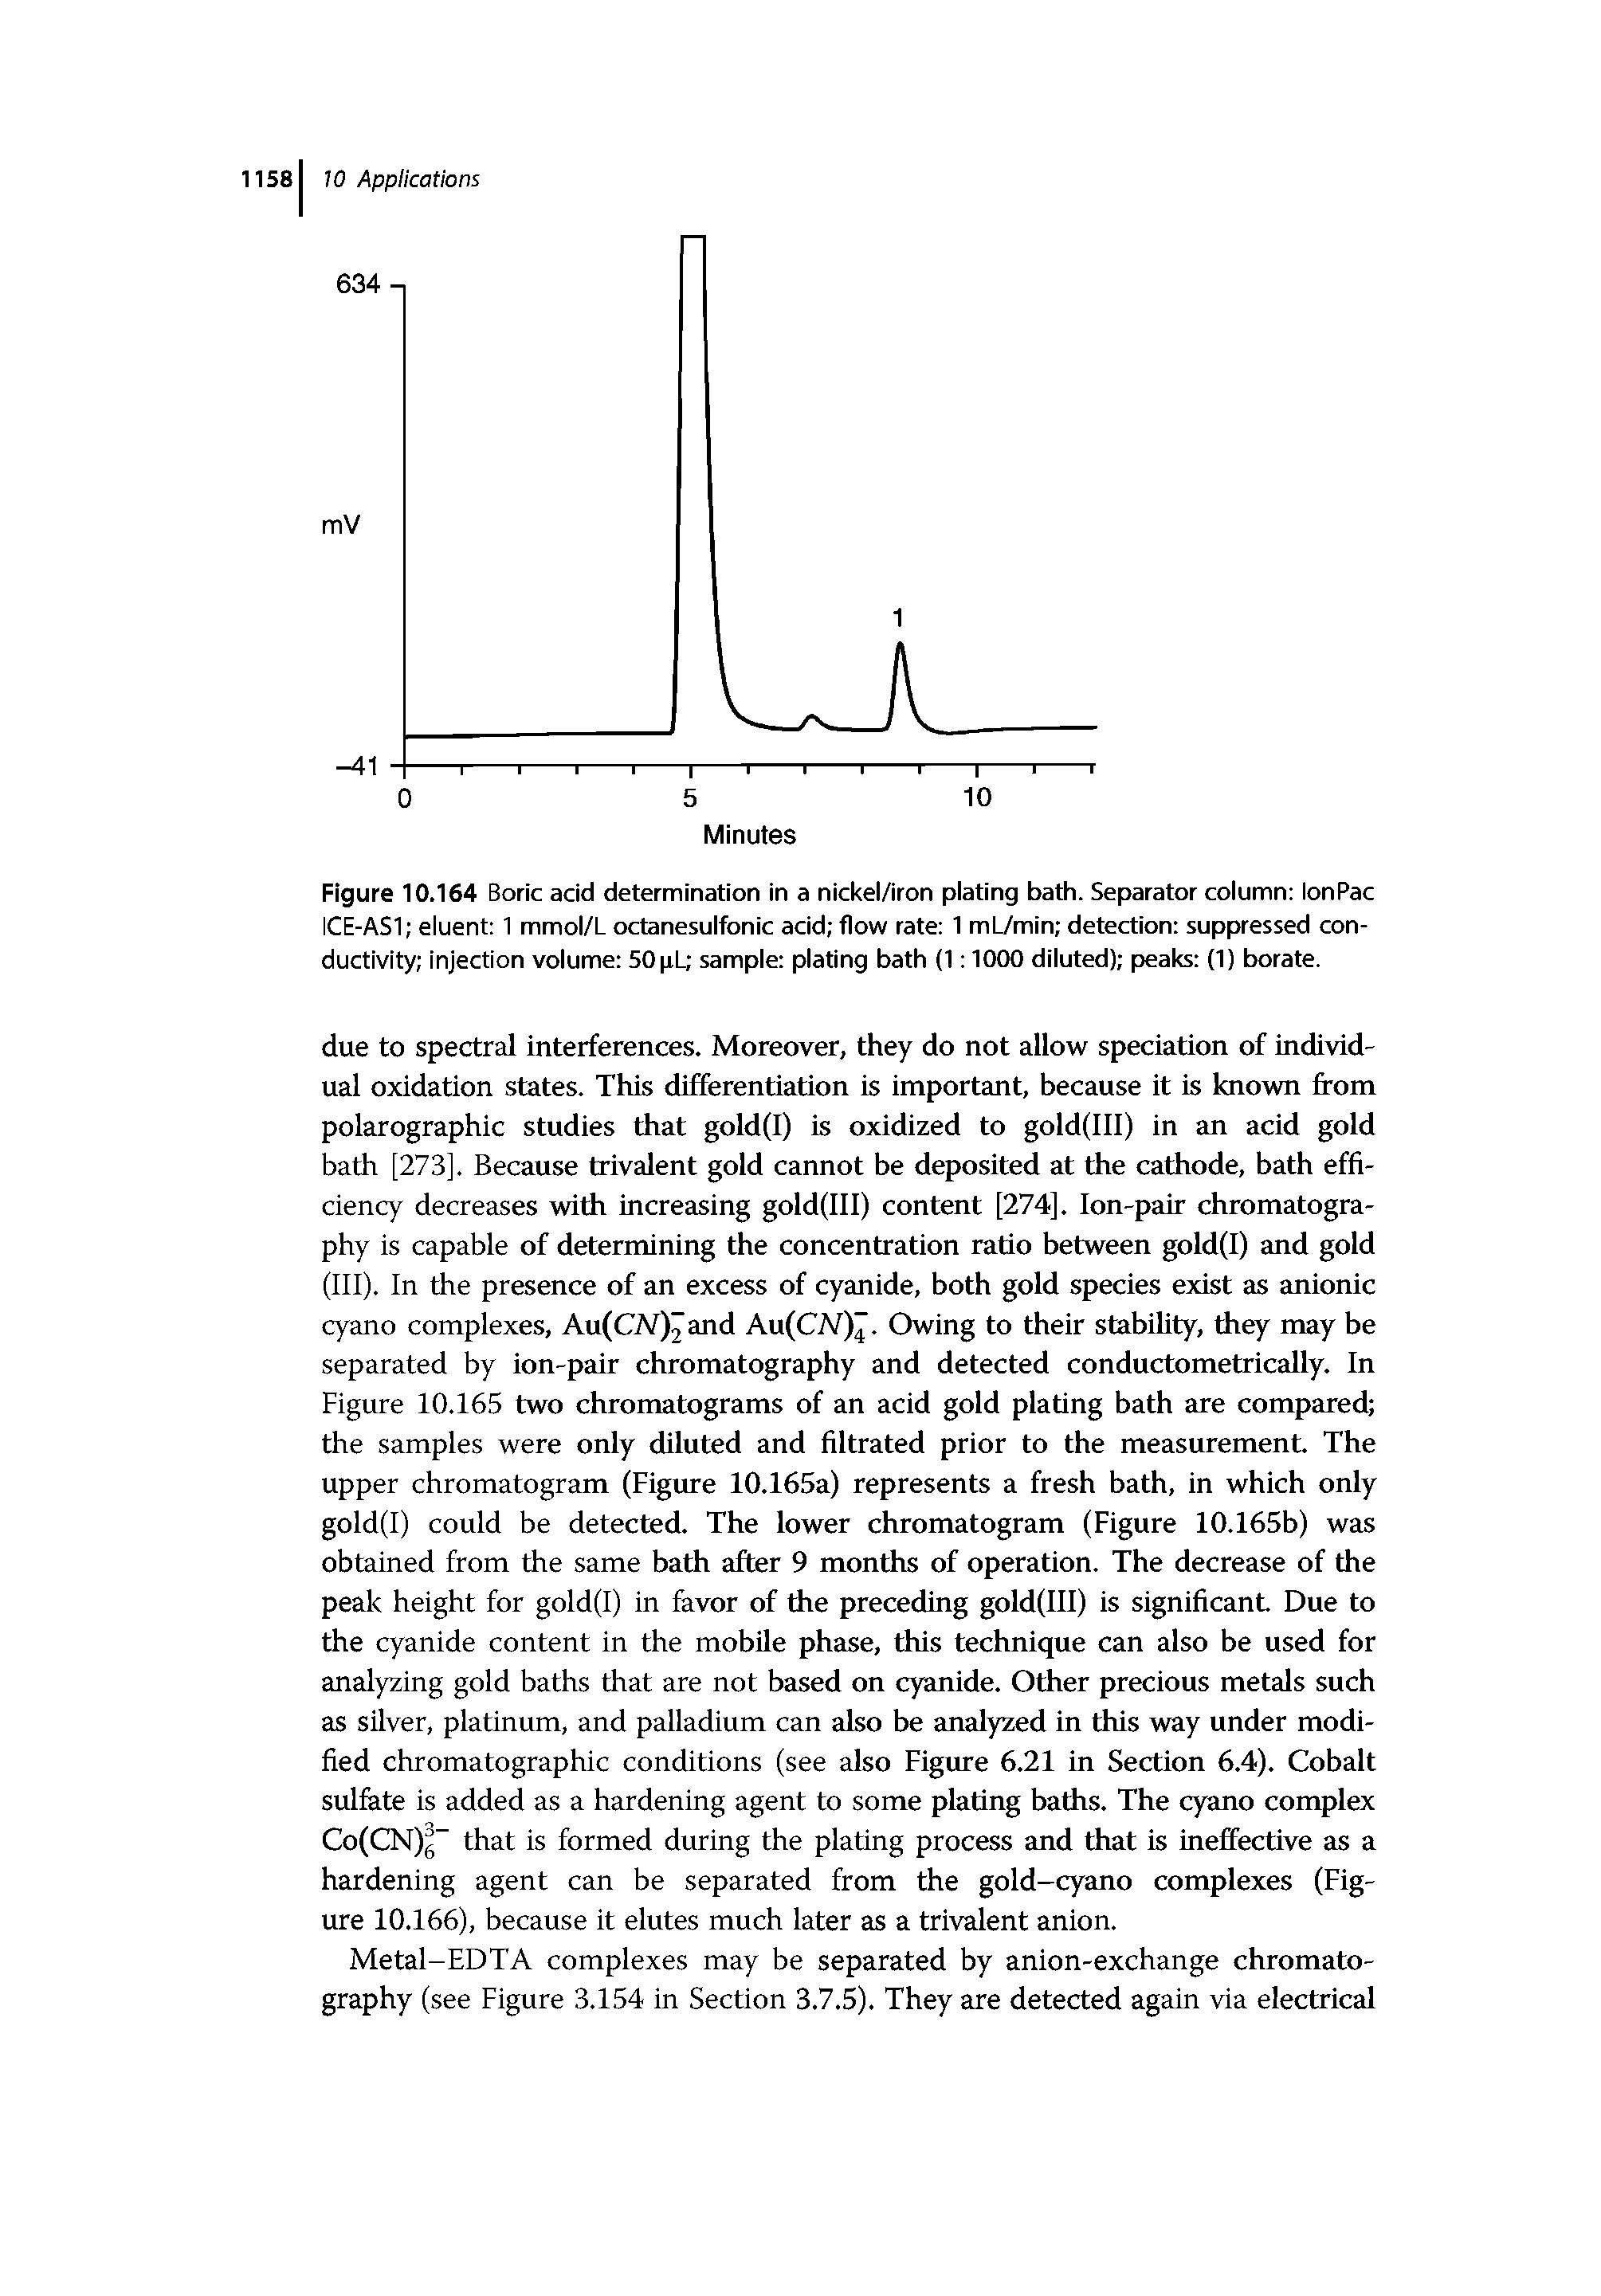 Figure 10.164 Boric acid determination in a nickei/iron piating bath. Separator coiumn ionPac ICE-AS1 eluent 1 mmoi/L octanesuifonic acid flow rate 1 mUmin detection suppressed conductivity injection volume 50 pL sample plating bath (1 1000 diluted) peaks (1) borate.